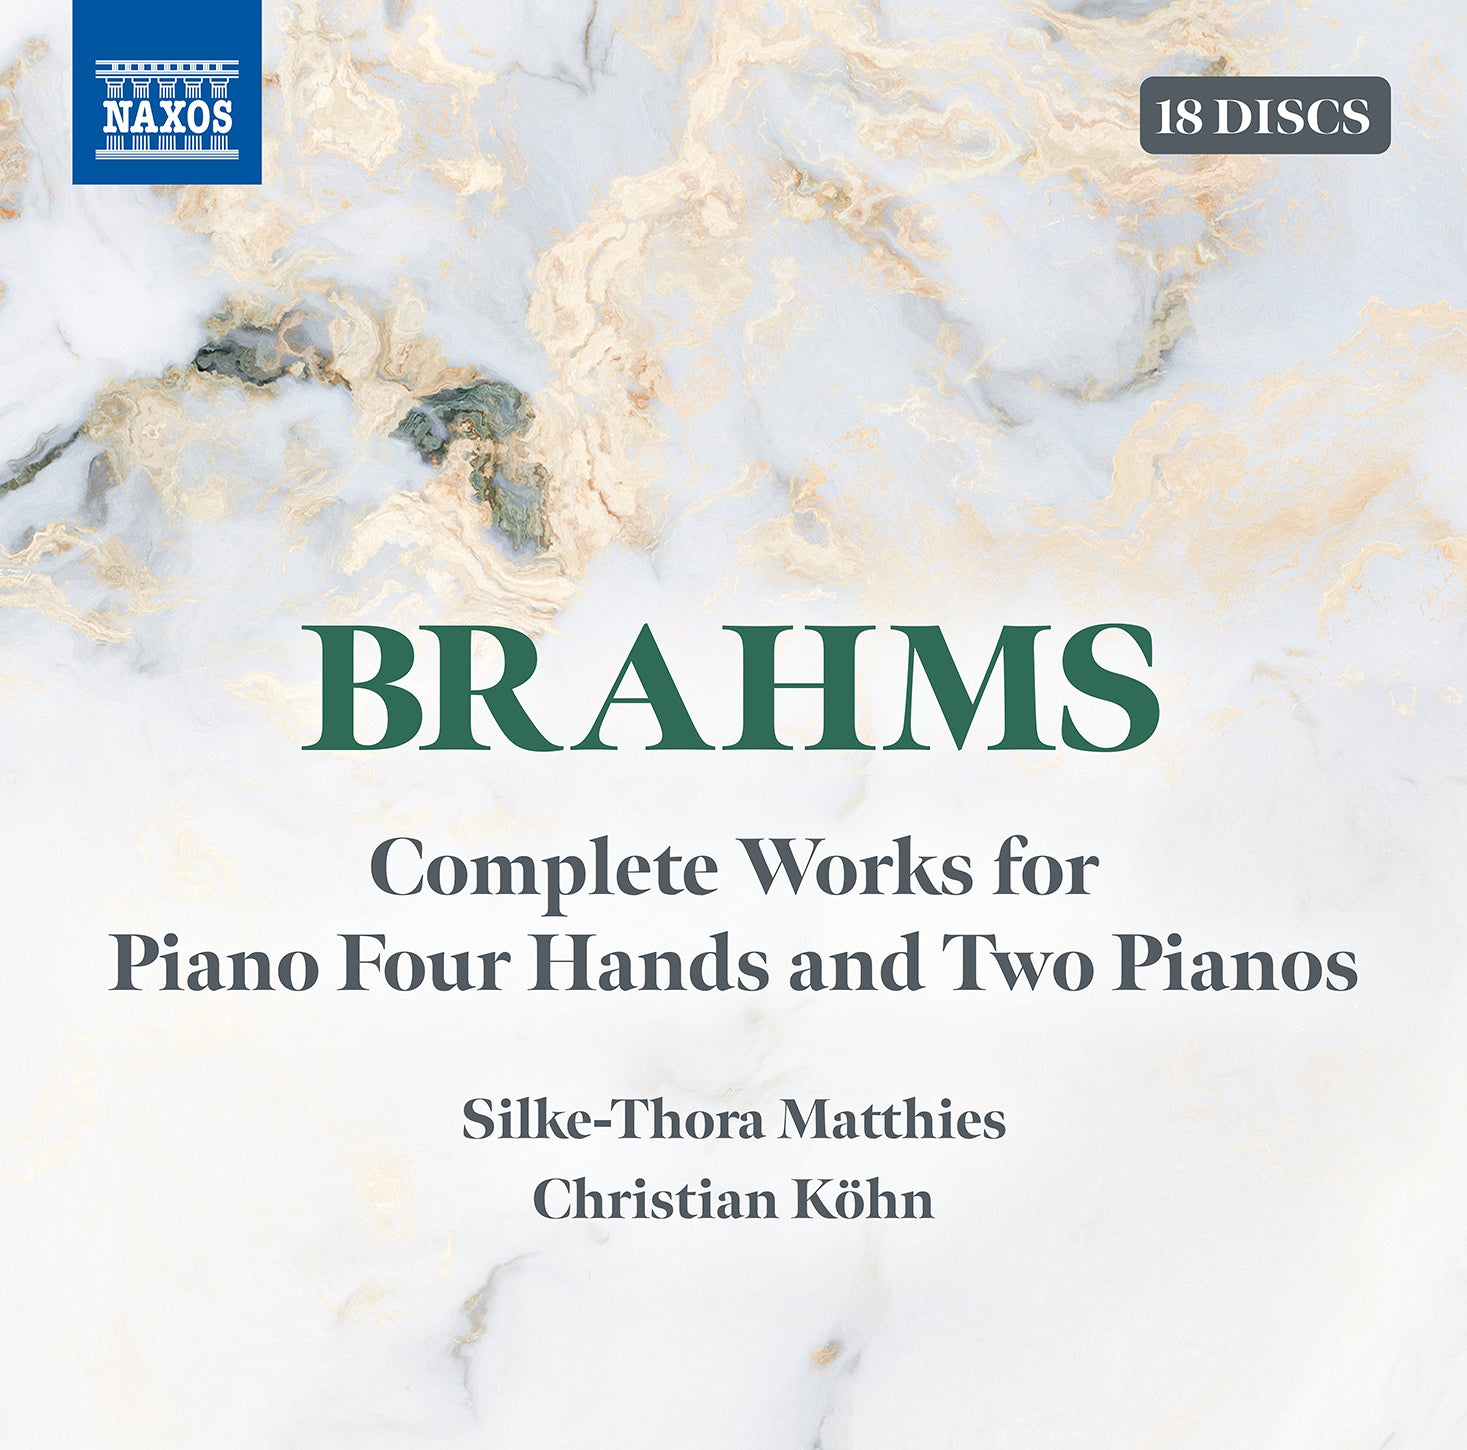 Brahms: Complete Works for Piano 4-Hands & 2 Pianos / Matthies, Köhn